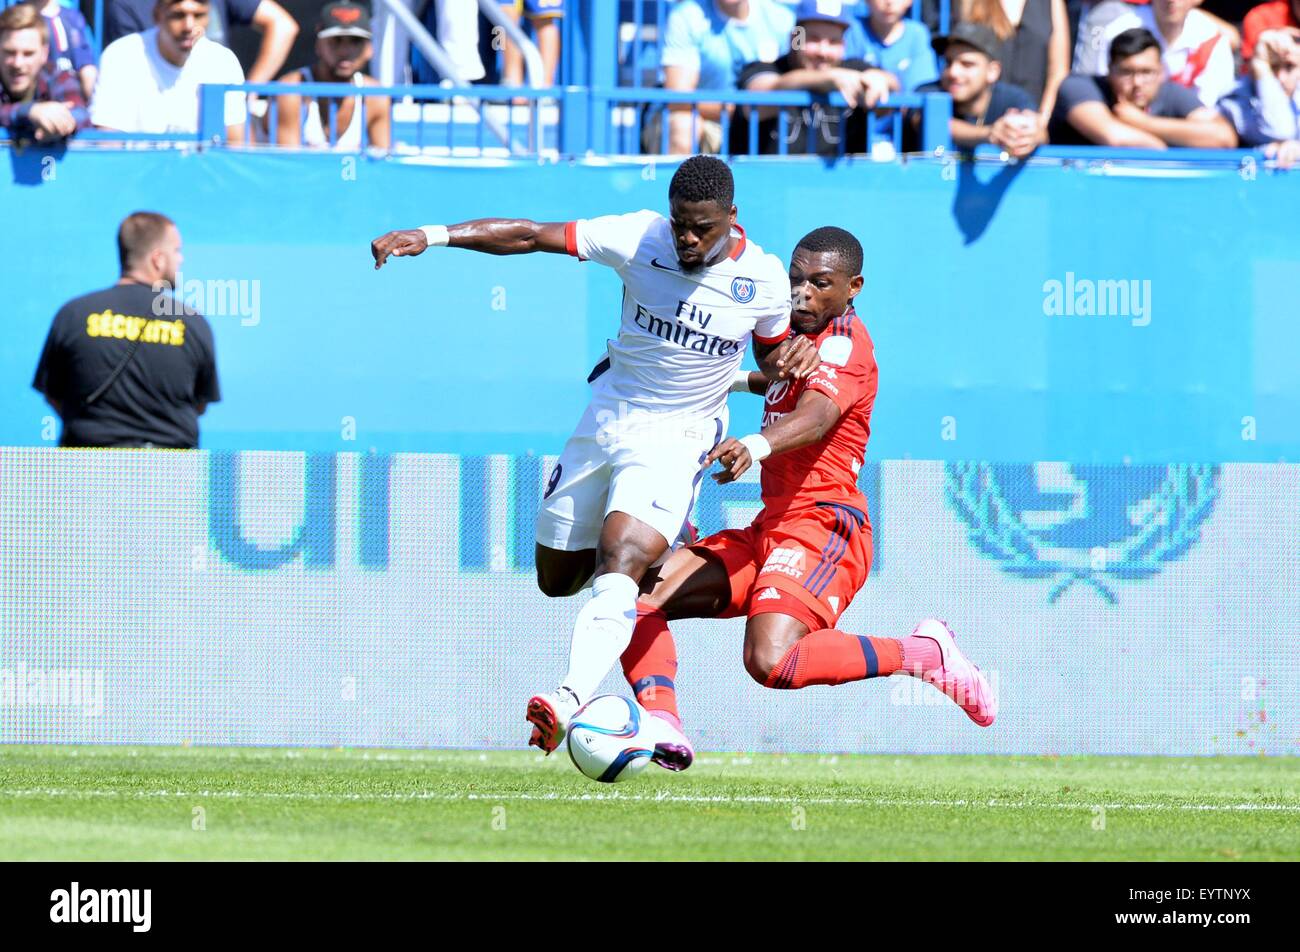 Montreal, Canada. 01st Aug, 2015. French Trophy of Champions match, between Paris St German and Lyon. Serge Aurier (psg) tackled by Henri Bedimo (lyon) © Action Plus Sports/Alamy Live News Stock Photo